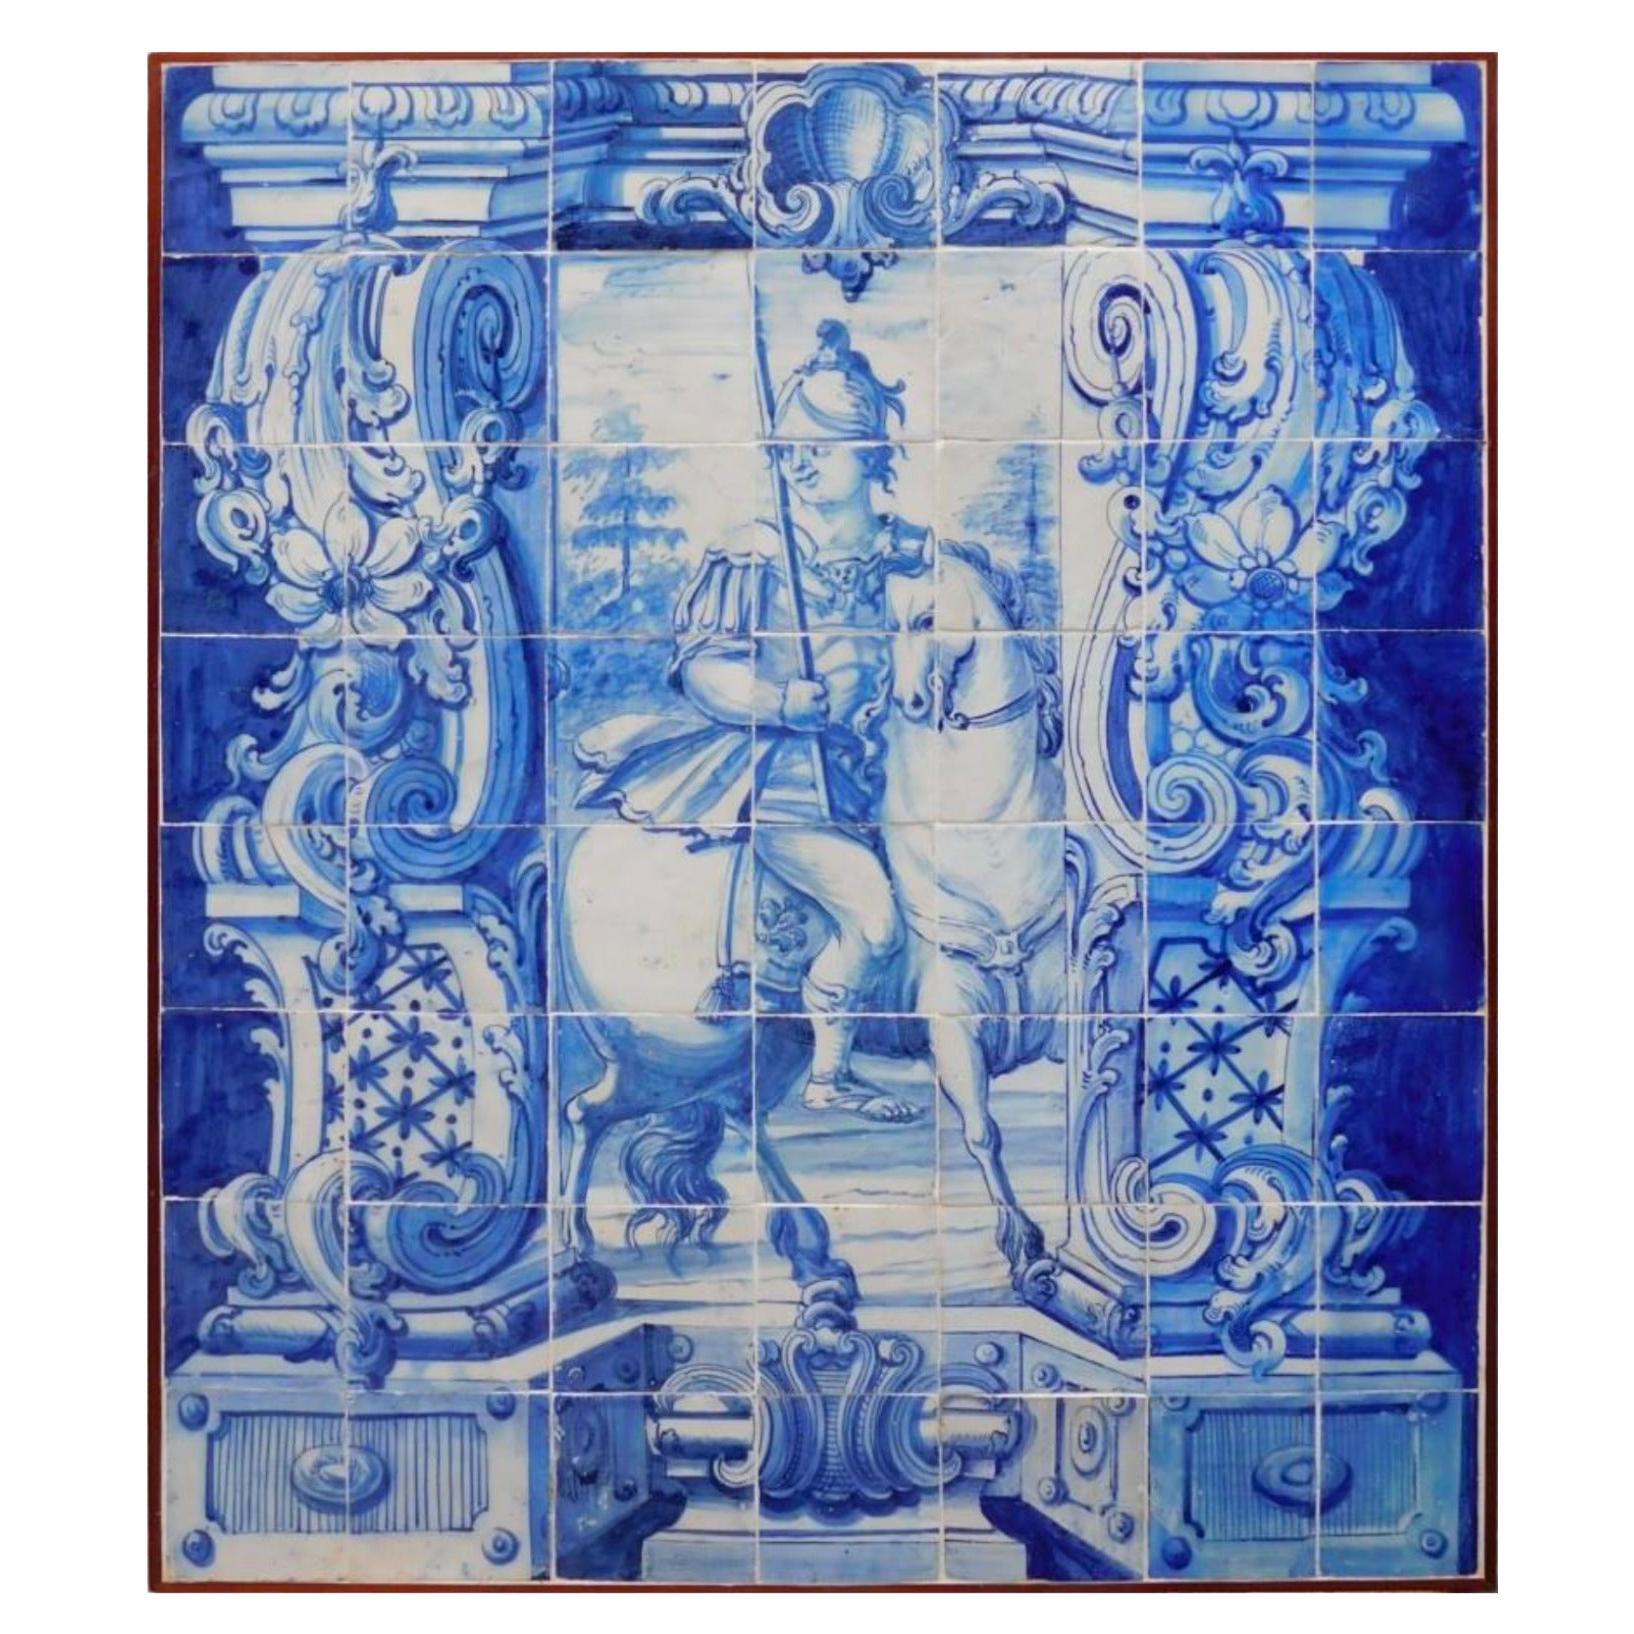 18th Century Portuguese "Azulejos" Knight "Vase" For Sale at 1stDibs